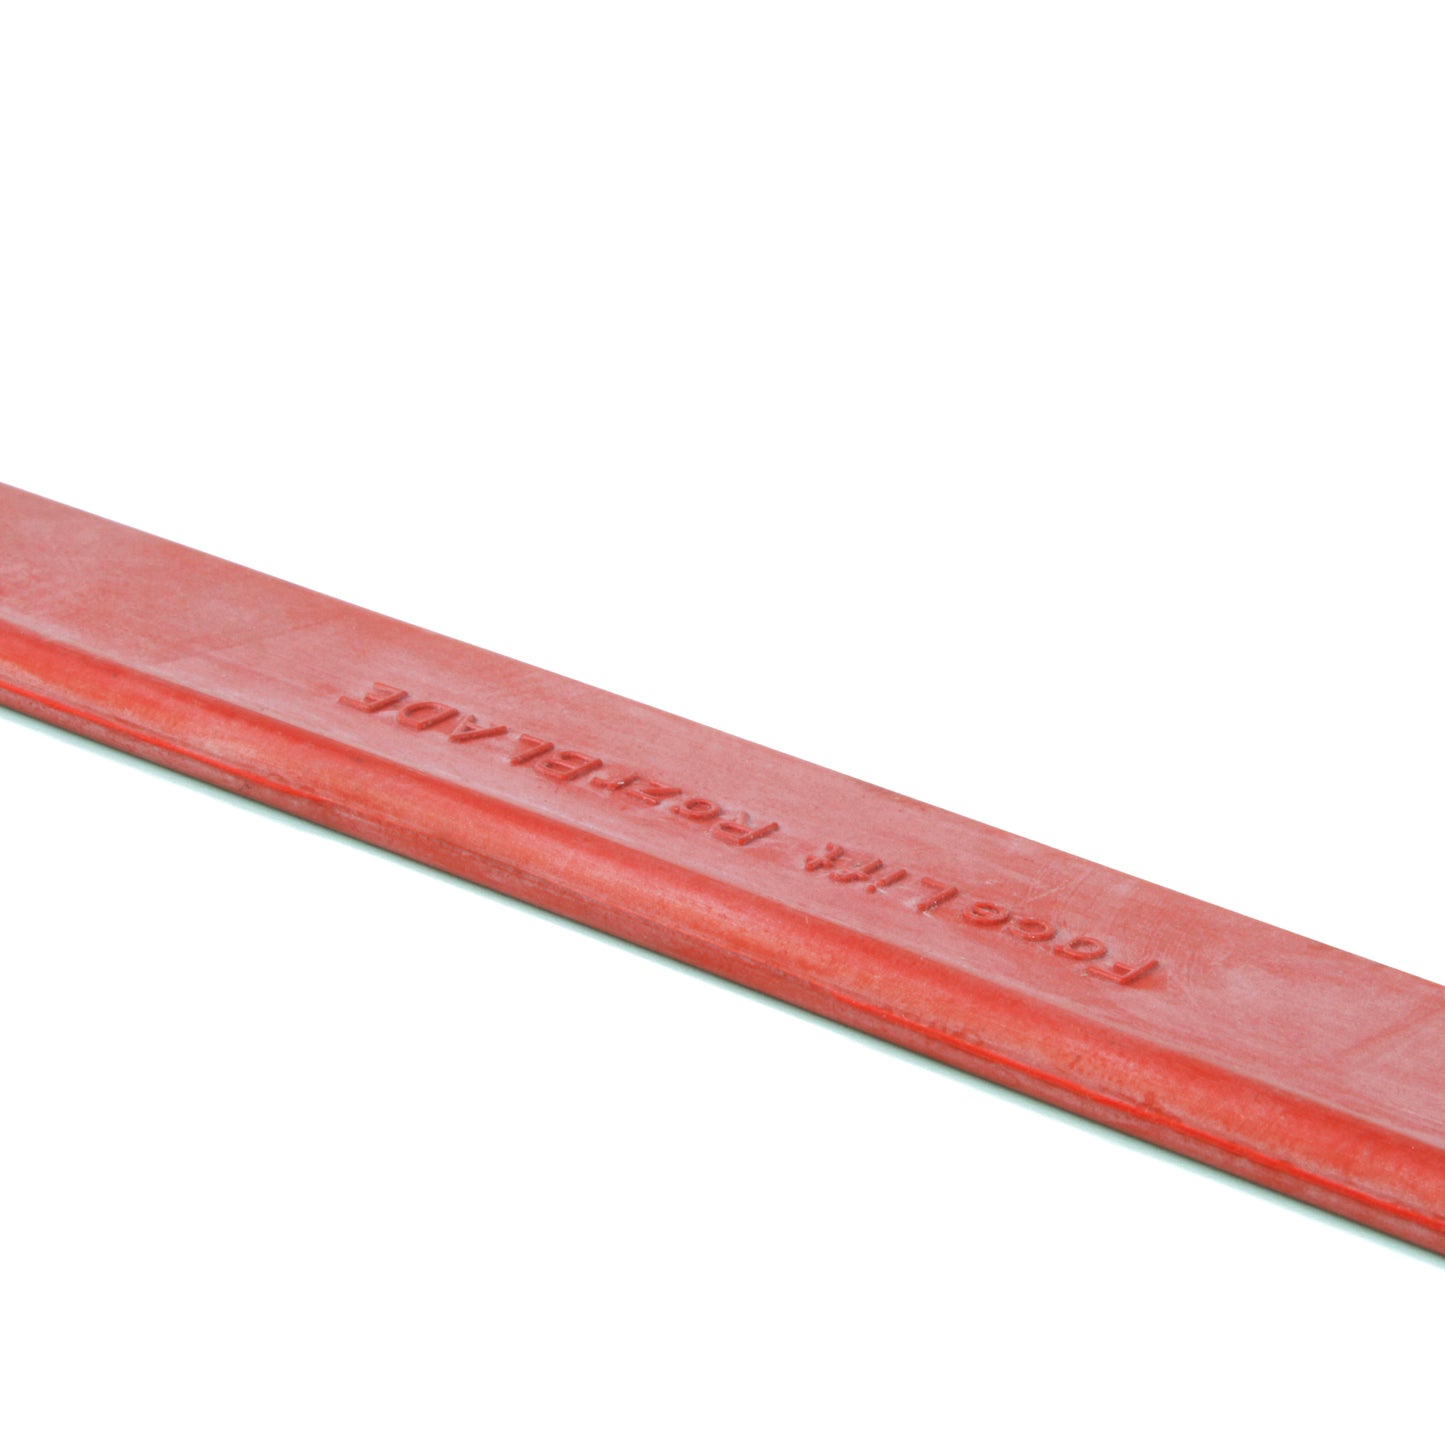 FaceLift® RazrBlade Red Squeegee Rubber